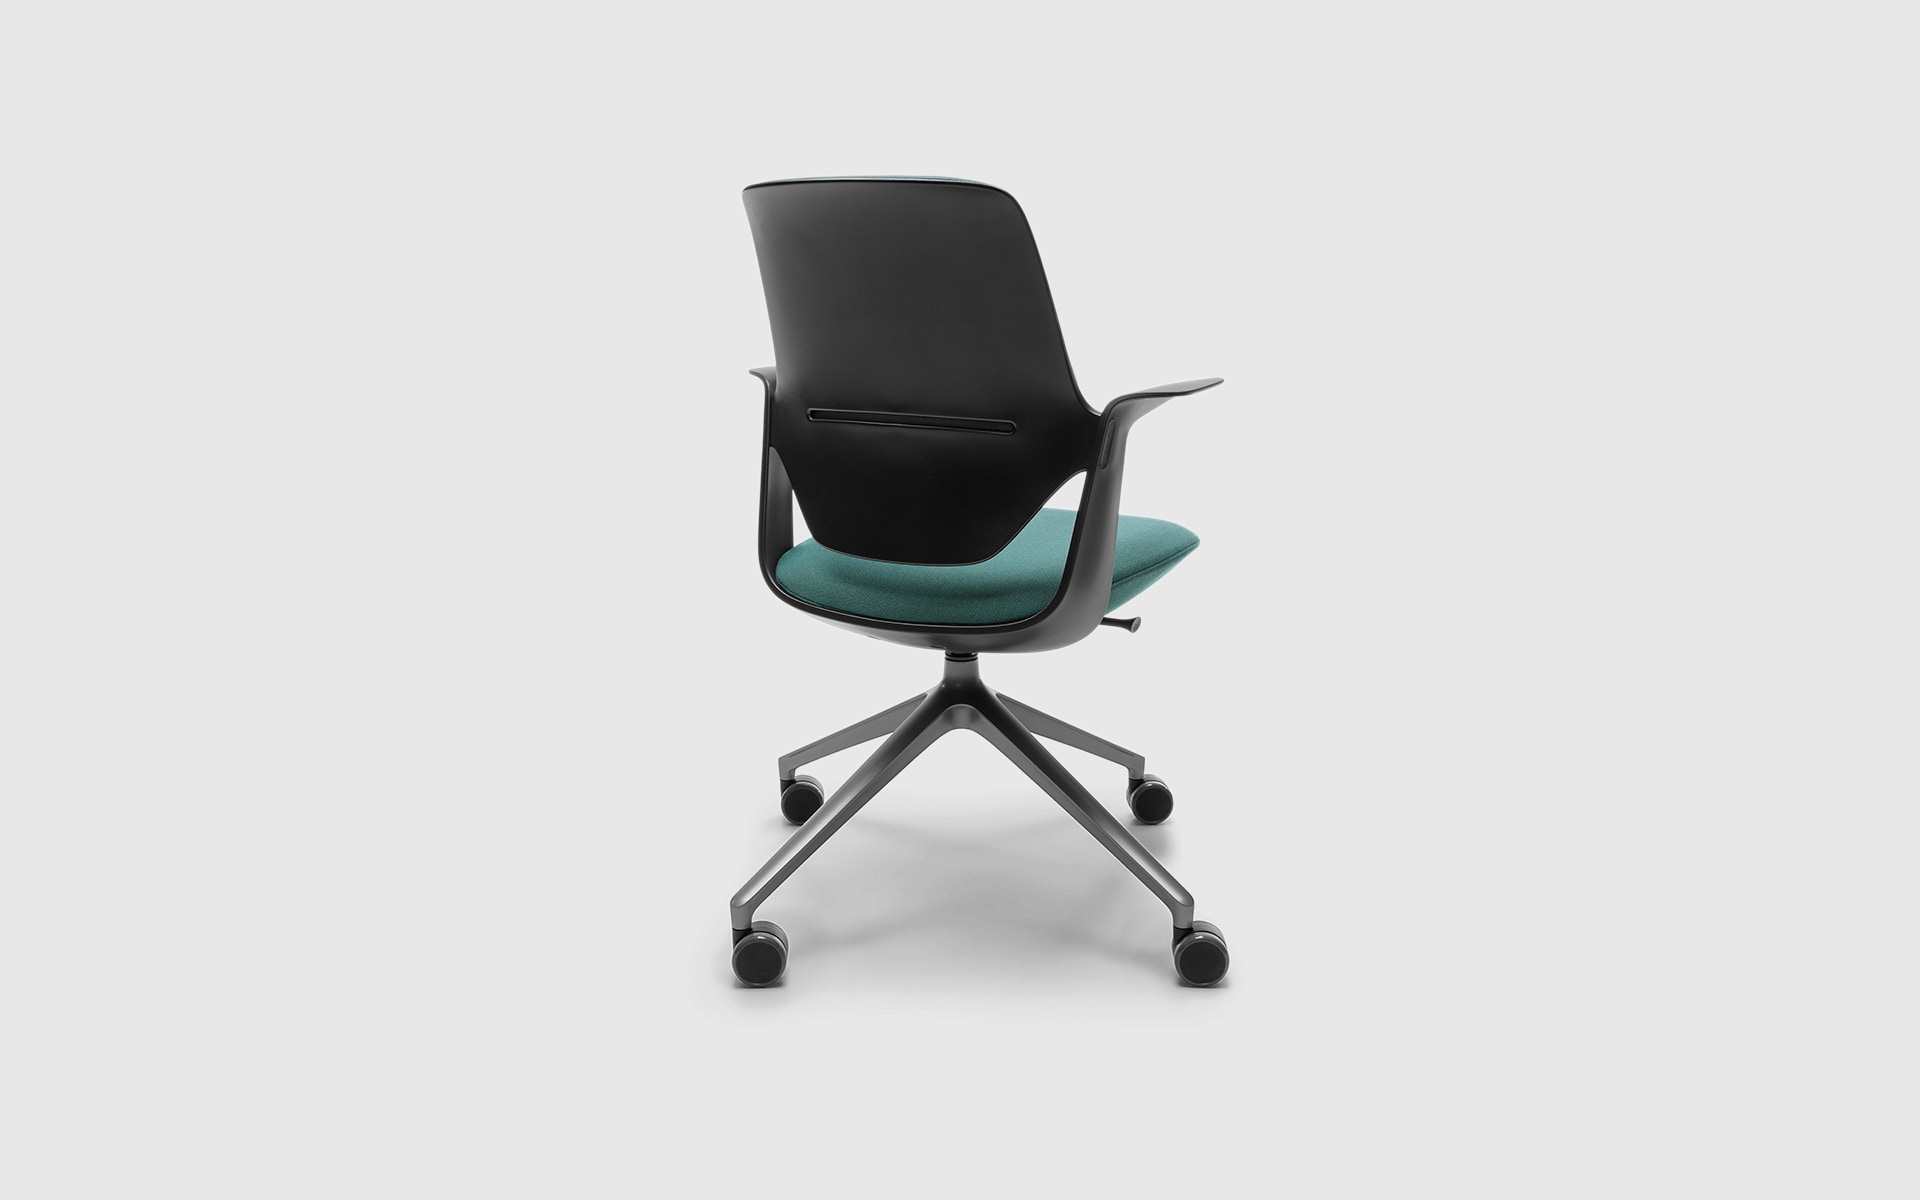 The Profim Trillo Pro office chair by ITO Design in black with green upholstery